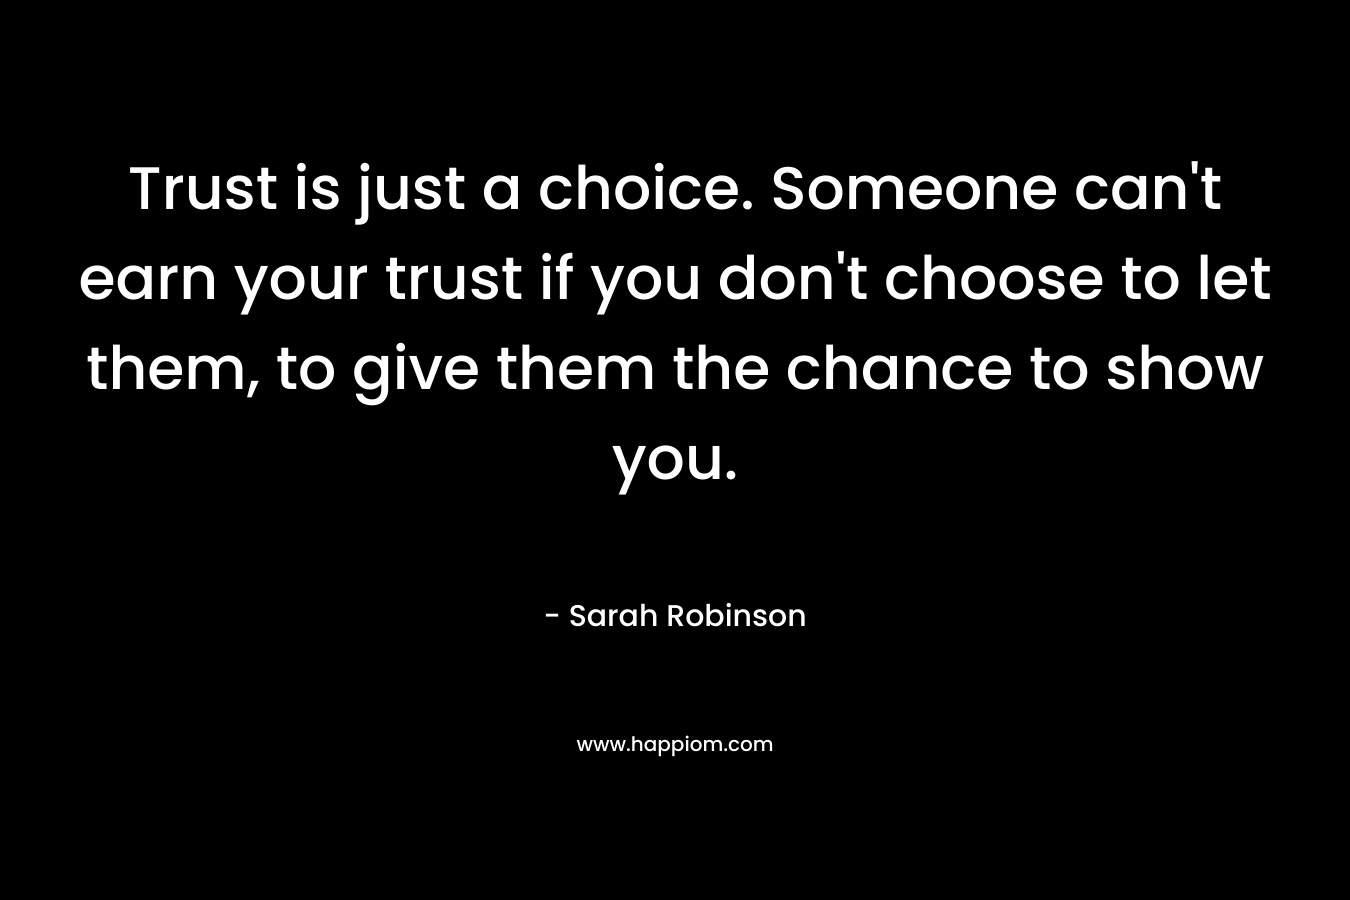 Trust is just a choice. Someone can't earn your trust if you don't choose to let them, to give them the chance to show you.